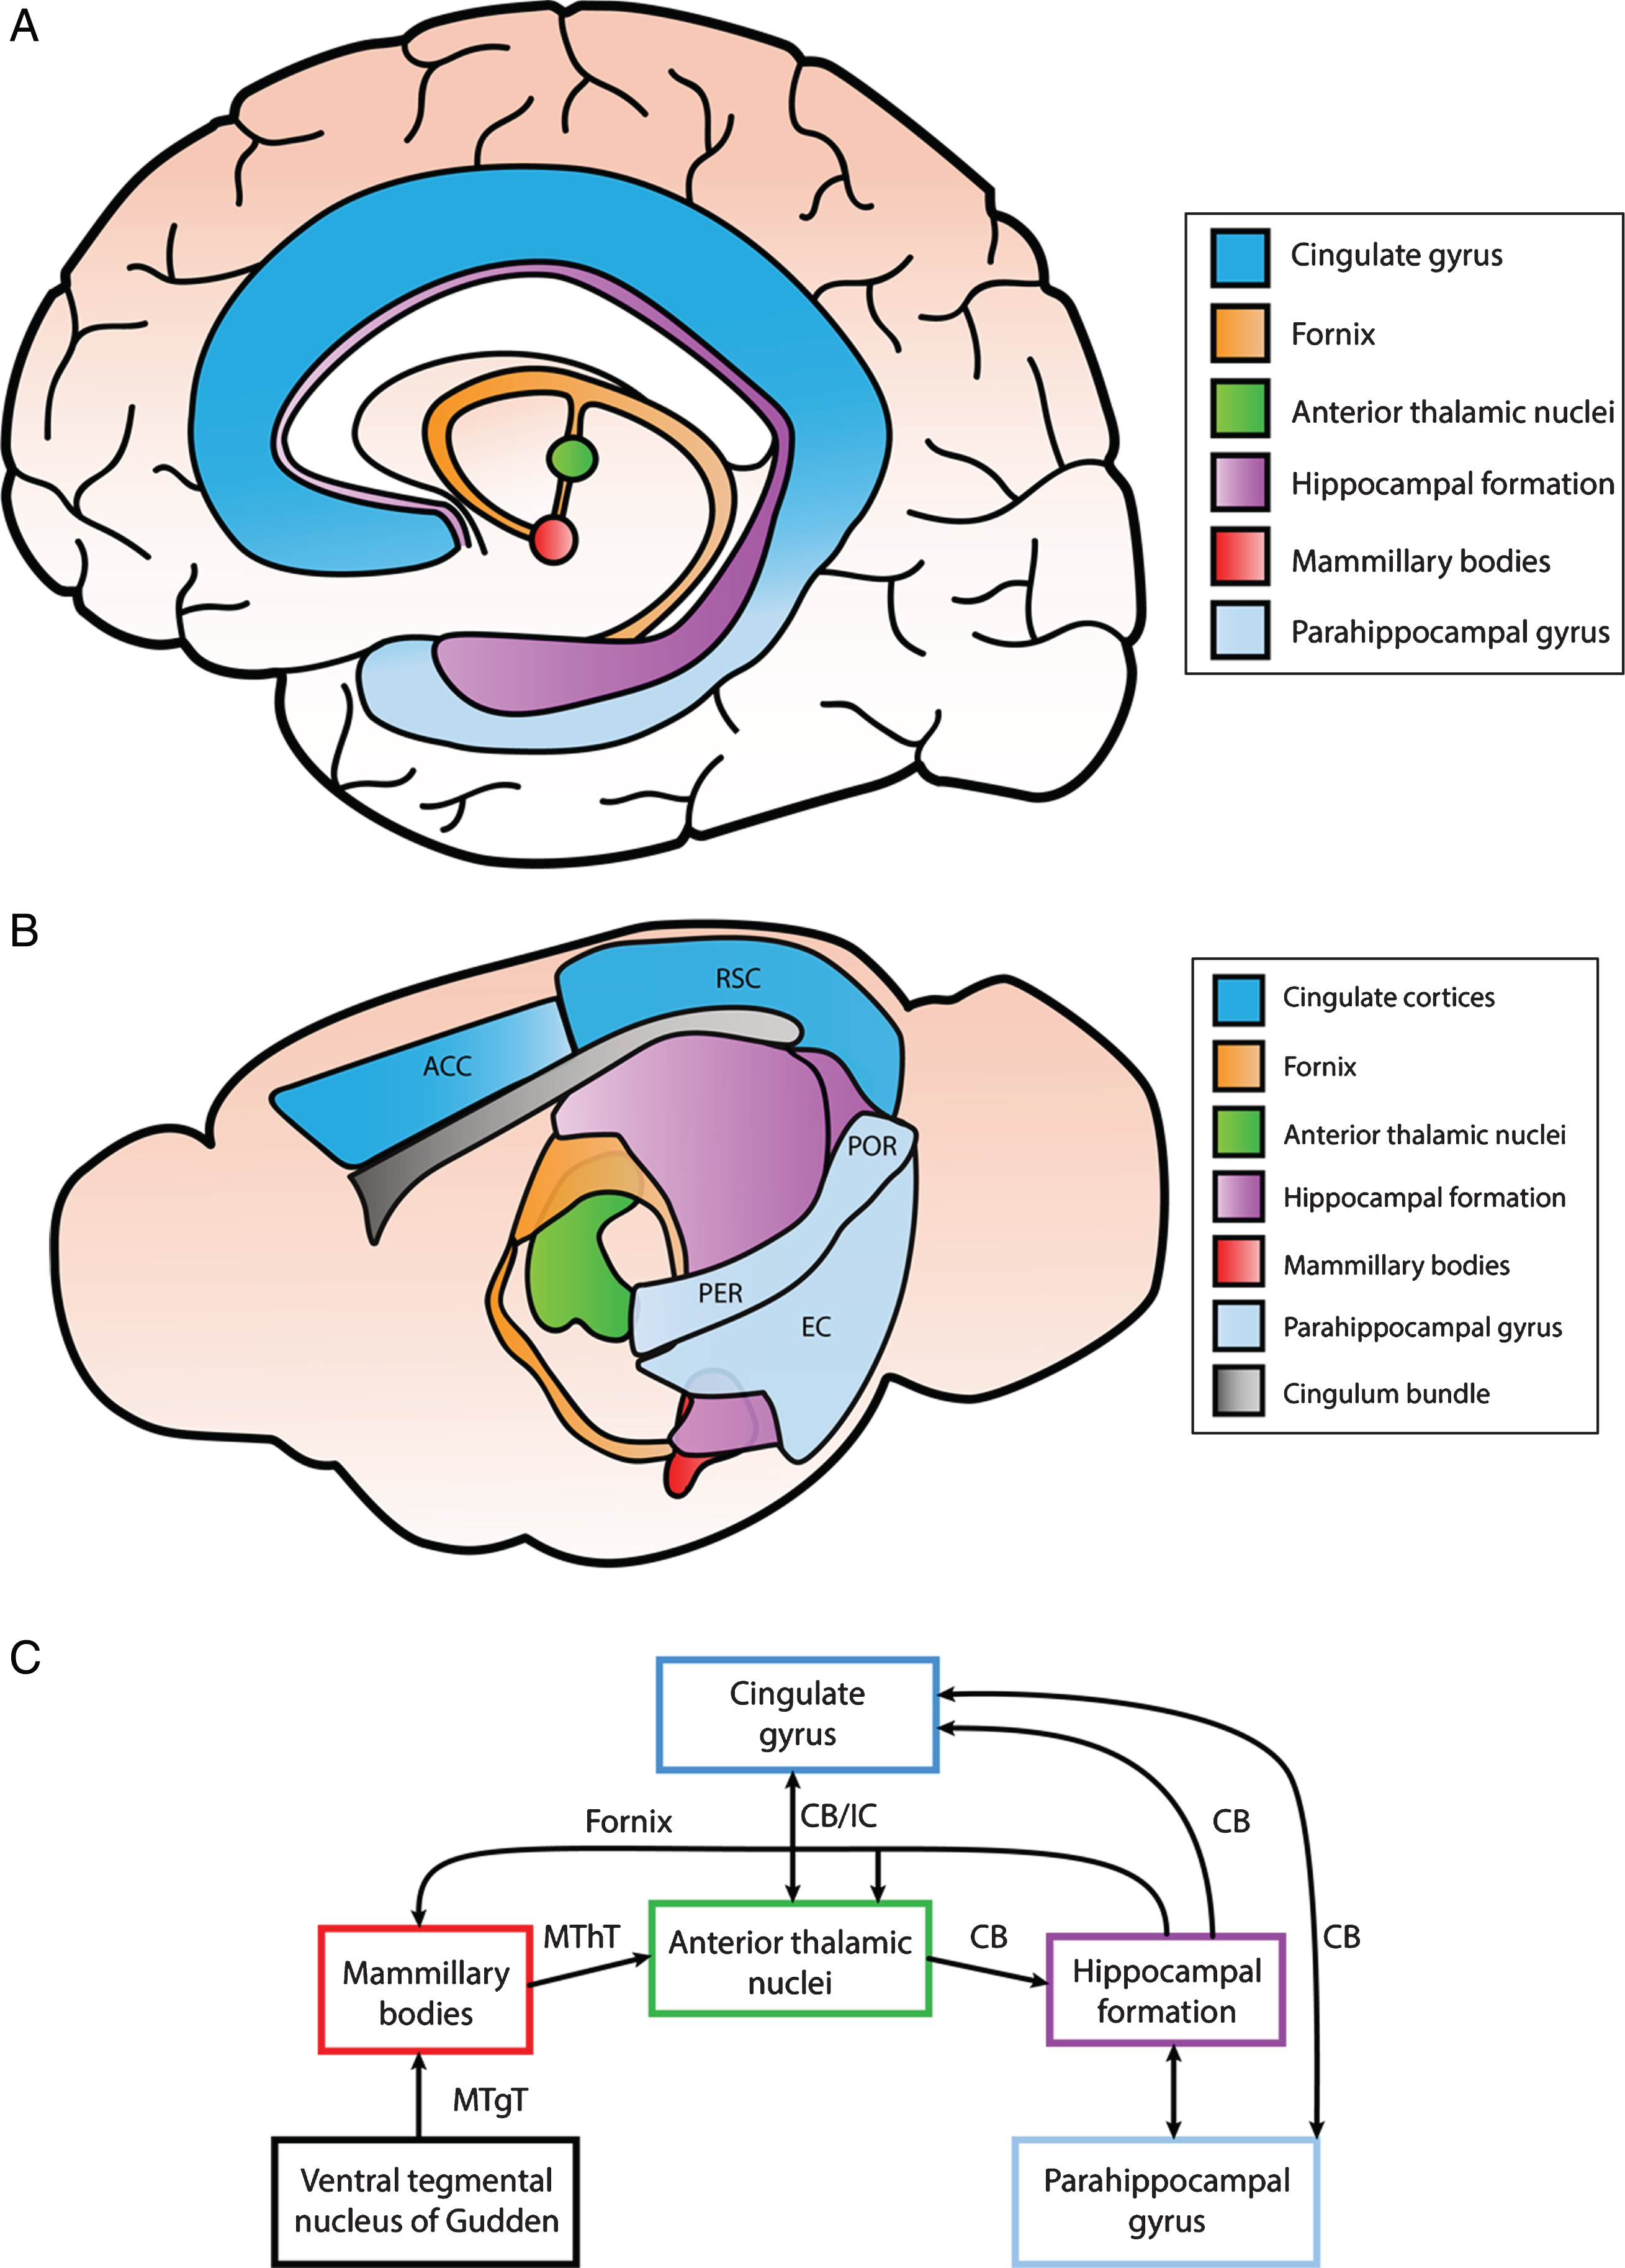 Simplified illustration of structures within the Papez circuit and the connections between them. A) Anatomical depiction of structures within the Papez circuit in the human brain. The cingulate gyrus can be divided into the anterior cingulate cortex (ACC), posterior cingulate cortex (PCC), and retrosplenial cortex (RSC). The anterior portion of the parahippocampal gyrus consists of the entorhinal and perirhinal cortex, while the posterior portion includes the postrhinal cortex. B) Anatomical schematic illustrating different regions of the Papez circuit in the mouse brain. The ACC and RSC are indicated as well as the entorhinal cortex (EC), perirhinal cortex (PER), and postrhinal cortex (POR) within the parahippocampal gyrus. C) Interconnections identified among different components of the Papez circuit primarily in rodent brain. These structures are connected via white matter tracts (CB, cingulum bundle; MThT, mammillothalamic tract; MTgT, mammillotegmental tract; IC, internal capsule; and fornix).